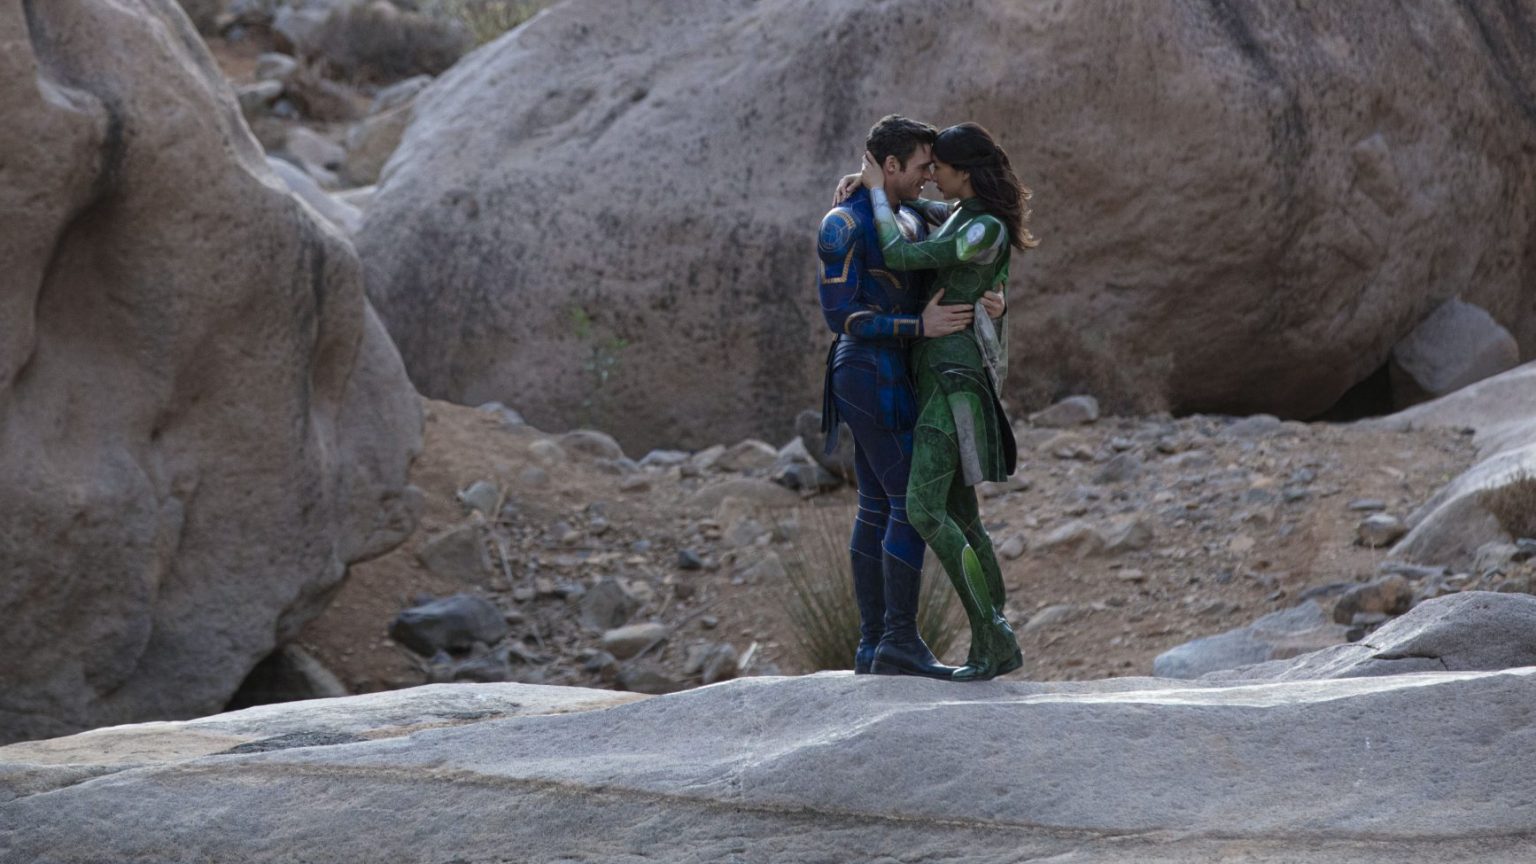 Richard Madden as Ikaris and Gemma Chan as Sersi embrace each other passionately while wearing their trademark blue and green cosmic suits in front of a rock formation as seen in the new Marvel Studios film ETERNALS directed by Chloé Zhao.